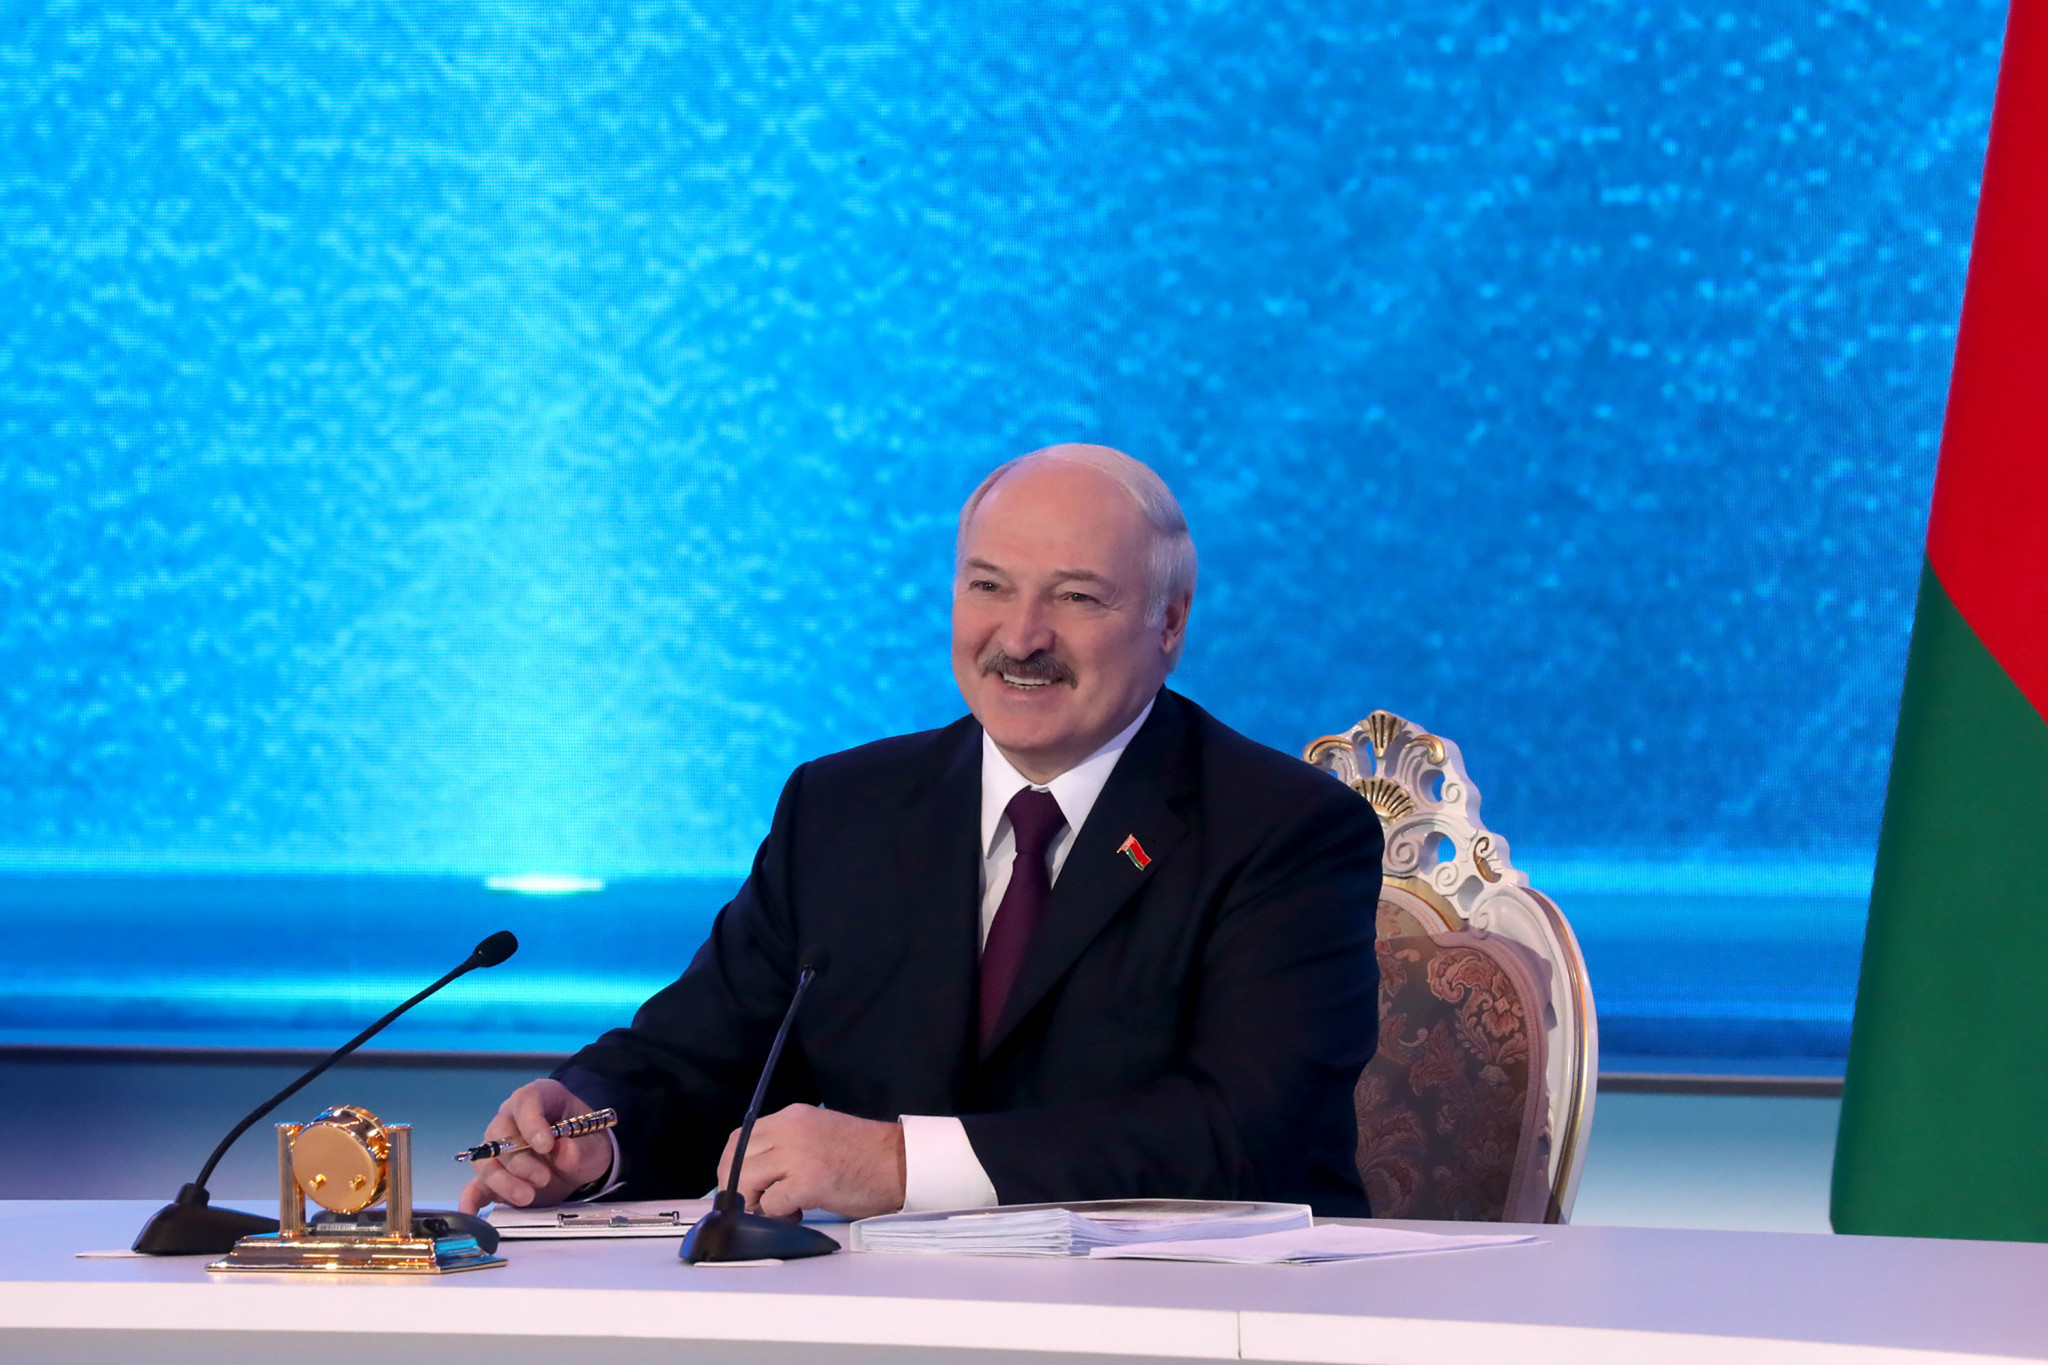 The conference has been organised in part by the Minsk 2019 Organising Committee, run by Belarusian President Alexander Lukashenko ©Getty Images